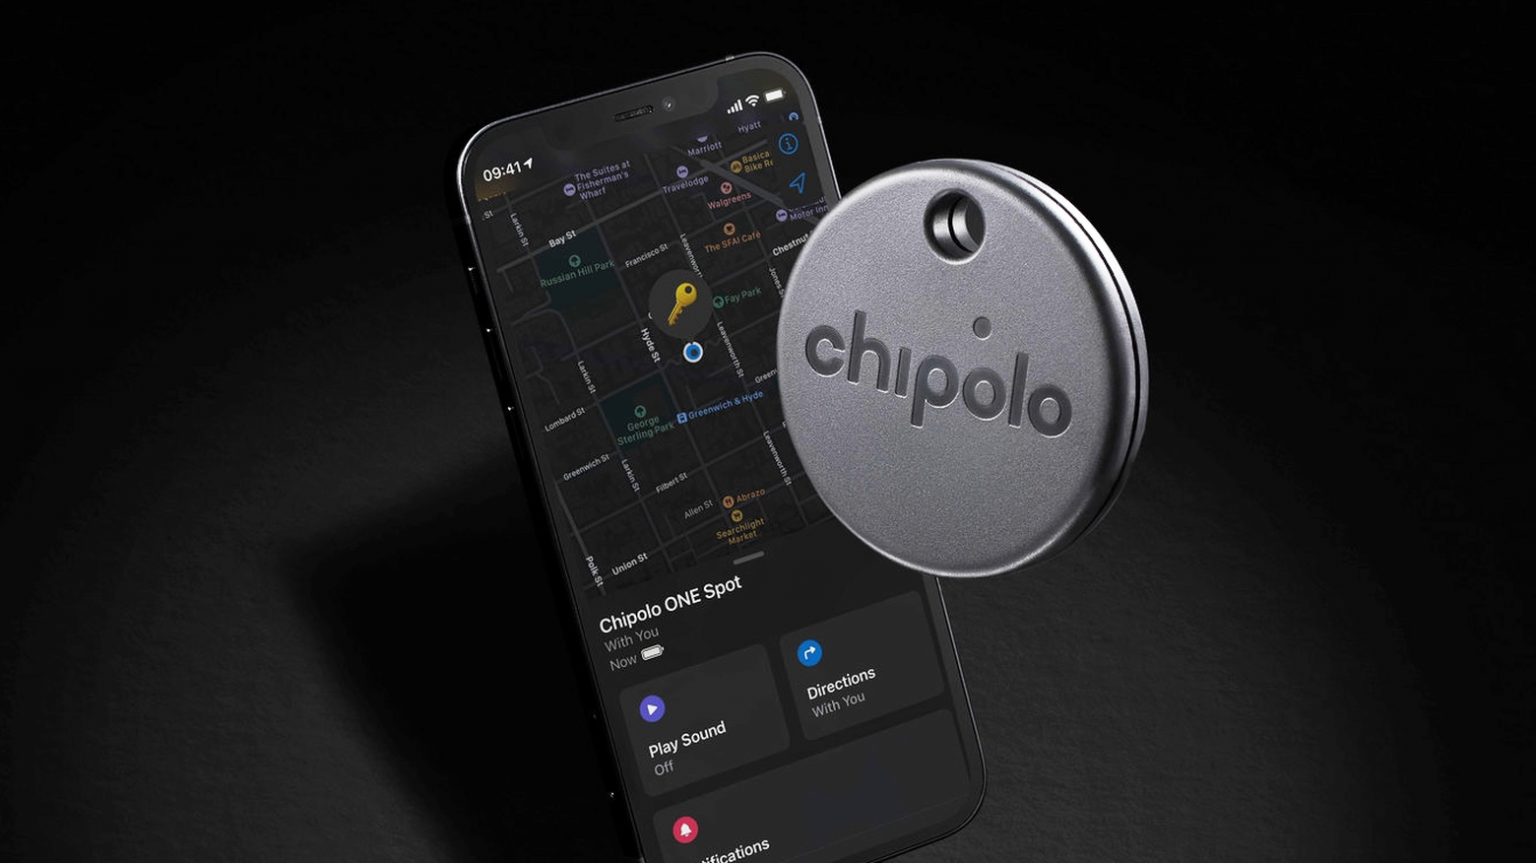 Chipolo One Spot launches June 2021. Price is unknown.